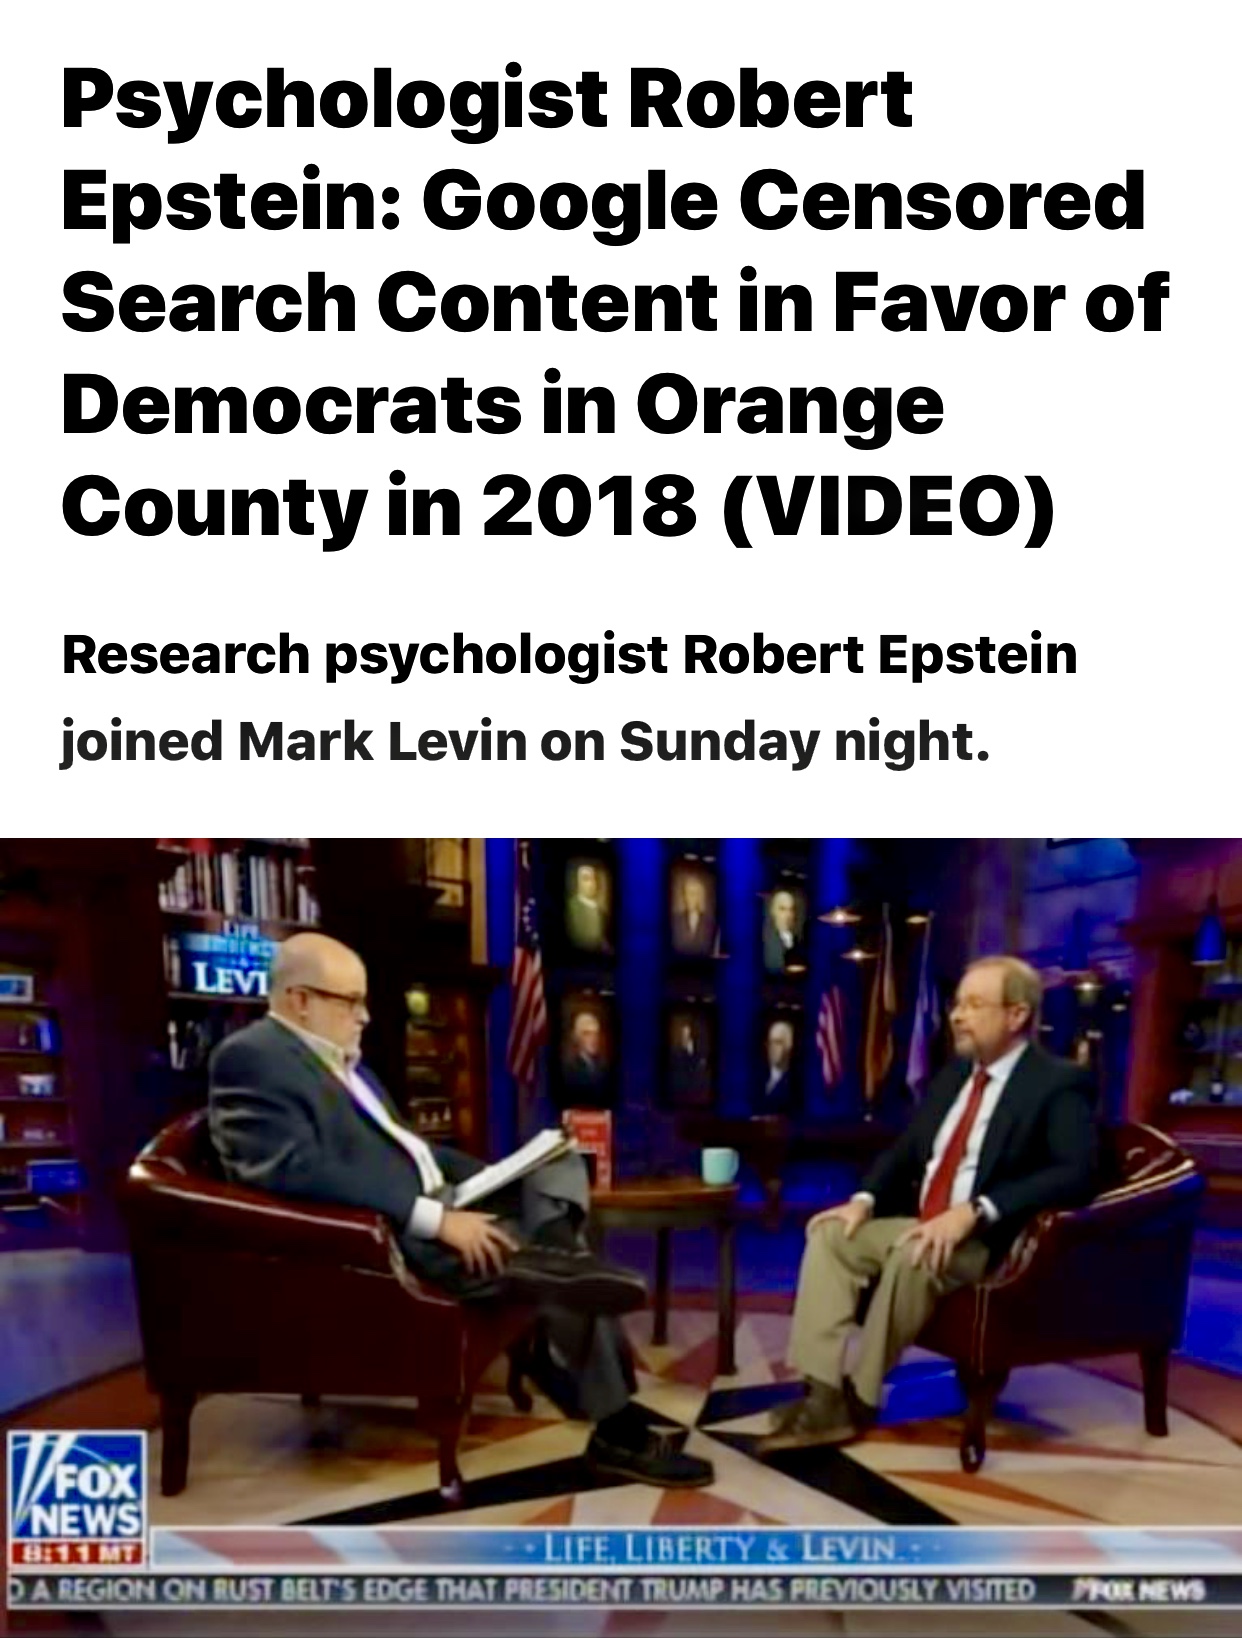 Psychologist Robert Epstein: Google Censored Search Content in Favor of Democrats in Orange County in 2018